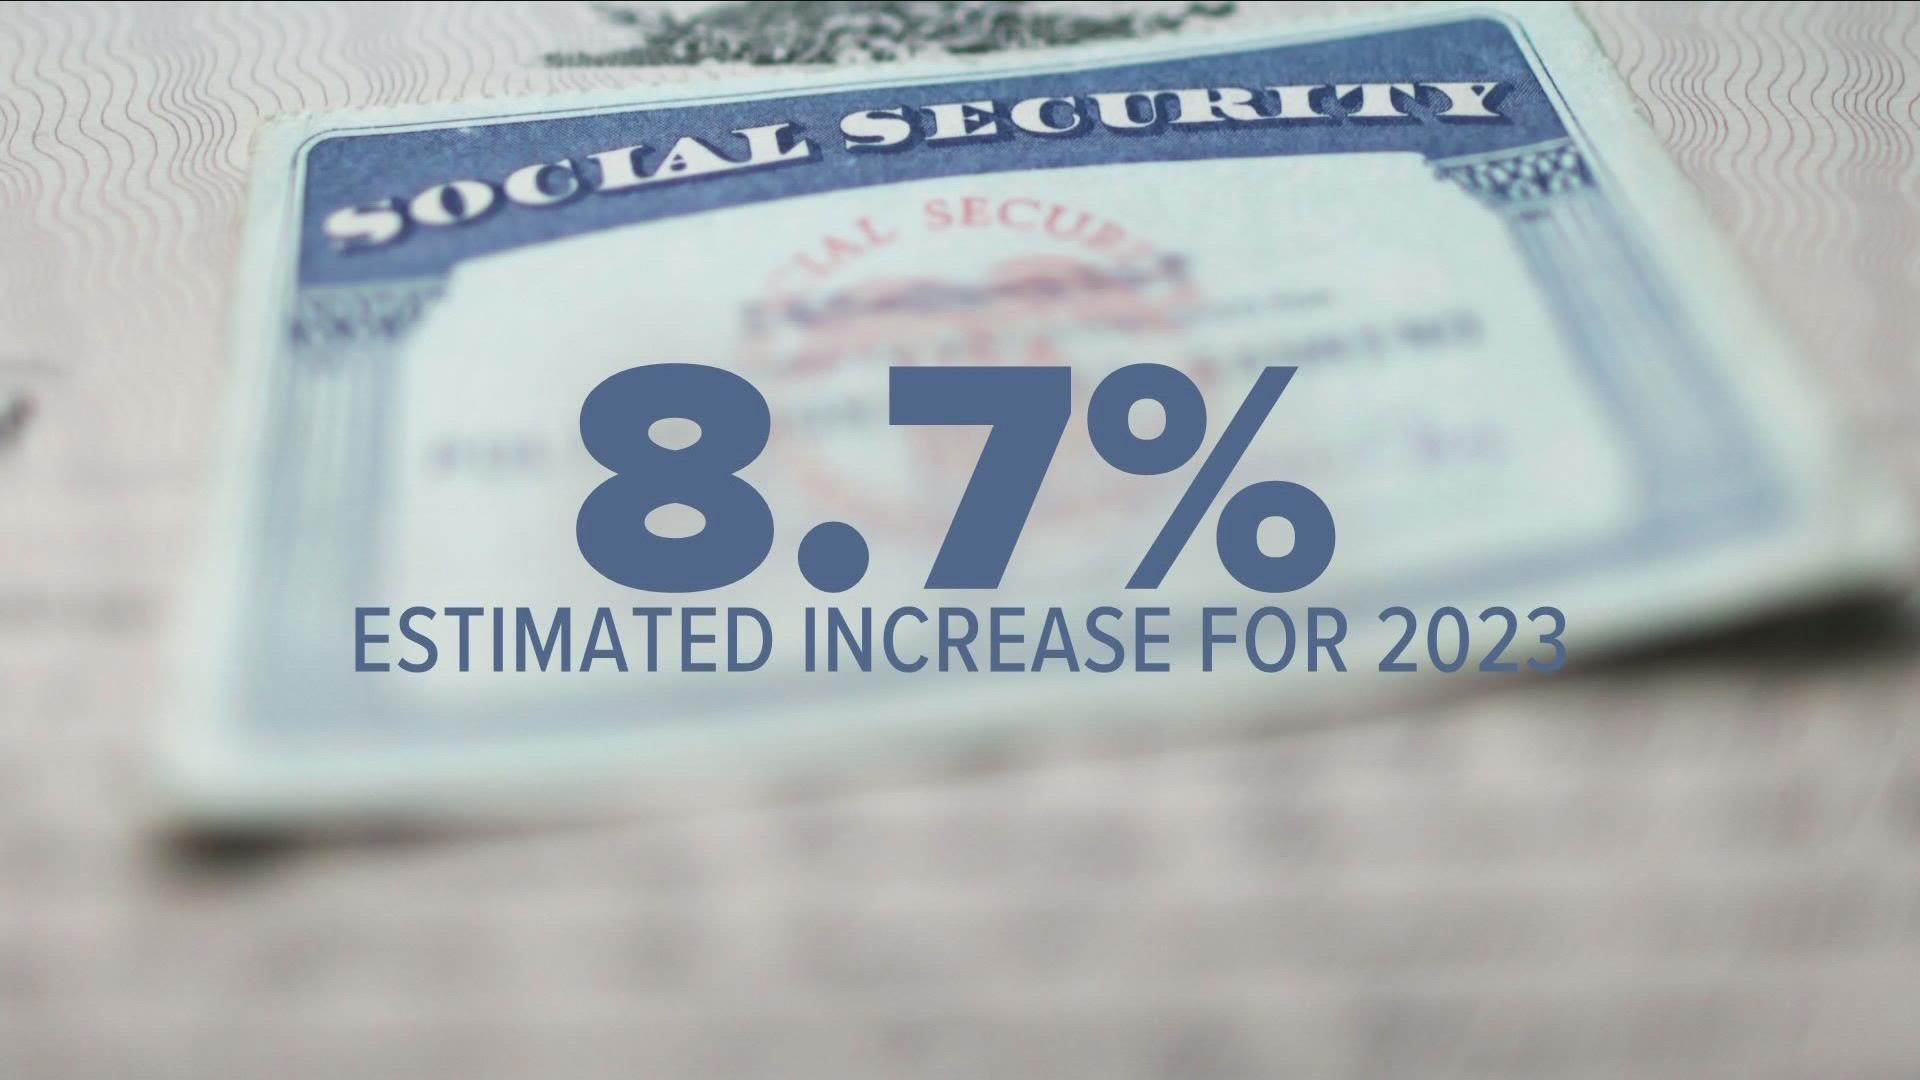 Approximately 70 million Americans will get a boosted Social Security amount worth $144 payment this 2023.